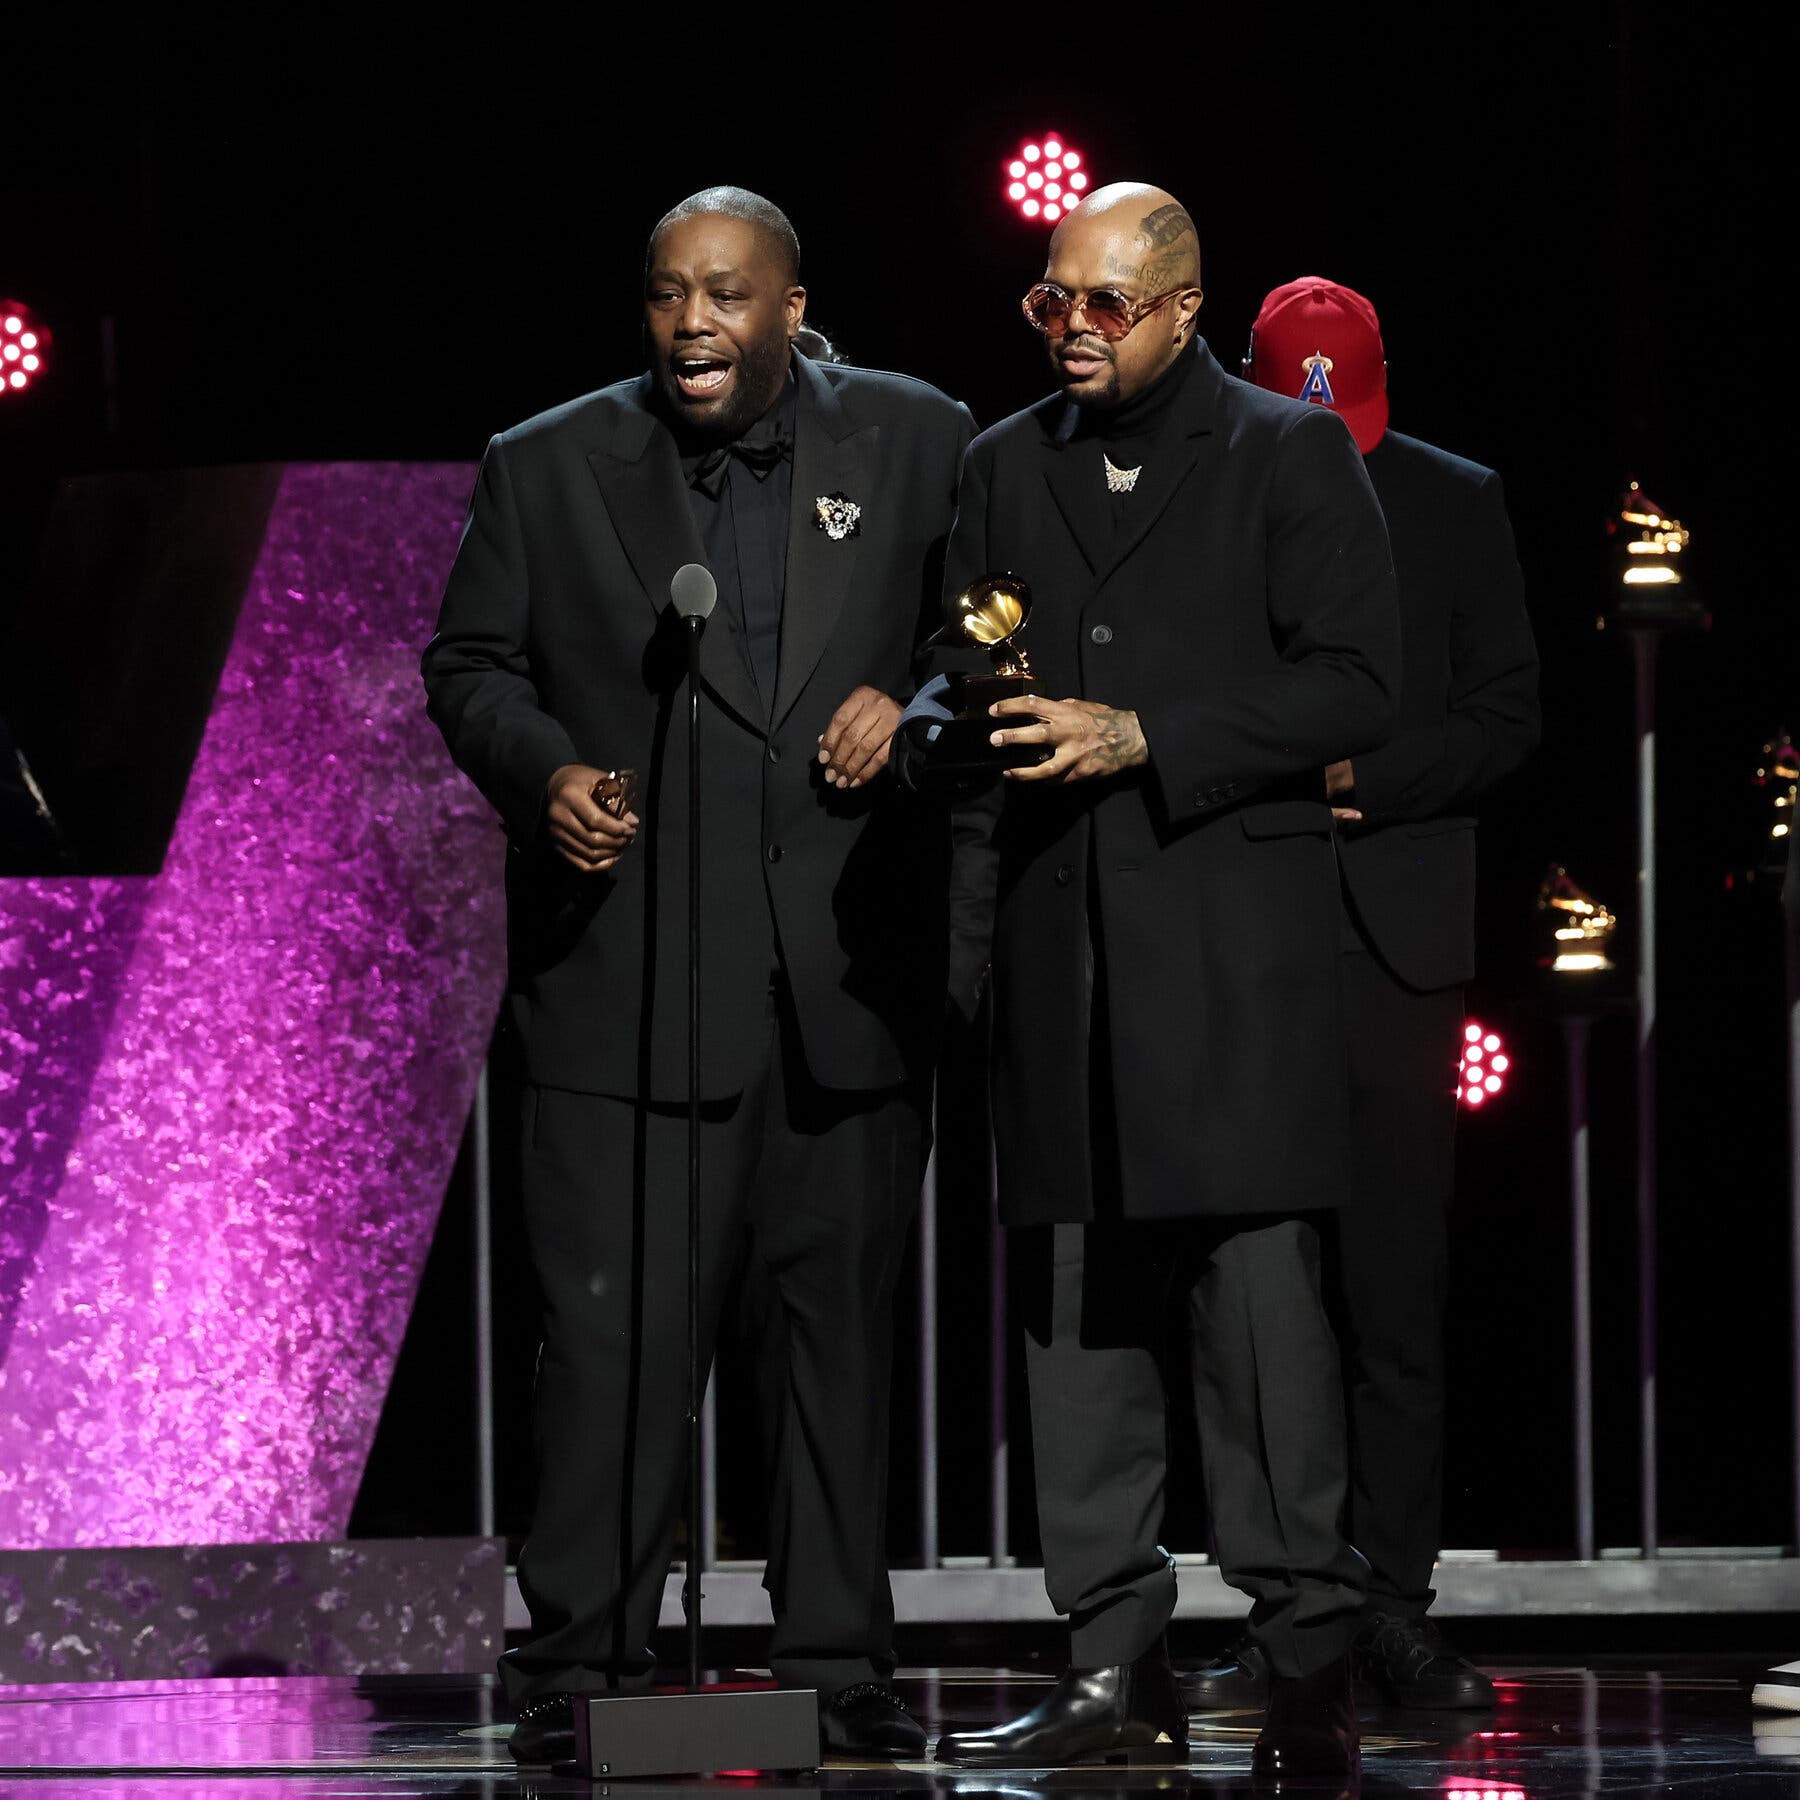 Killer Mike, left, and DJ Paul accepted the trophy for best rap song at the Grammys preshow.Credit...Leon Bennett/Getty Images